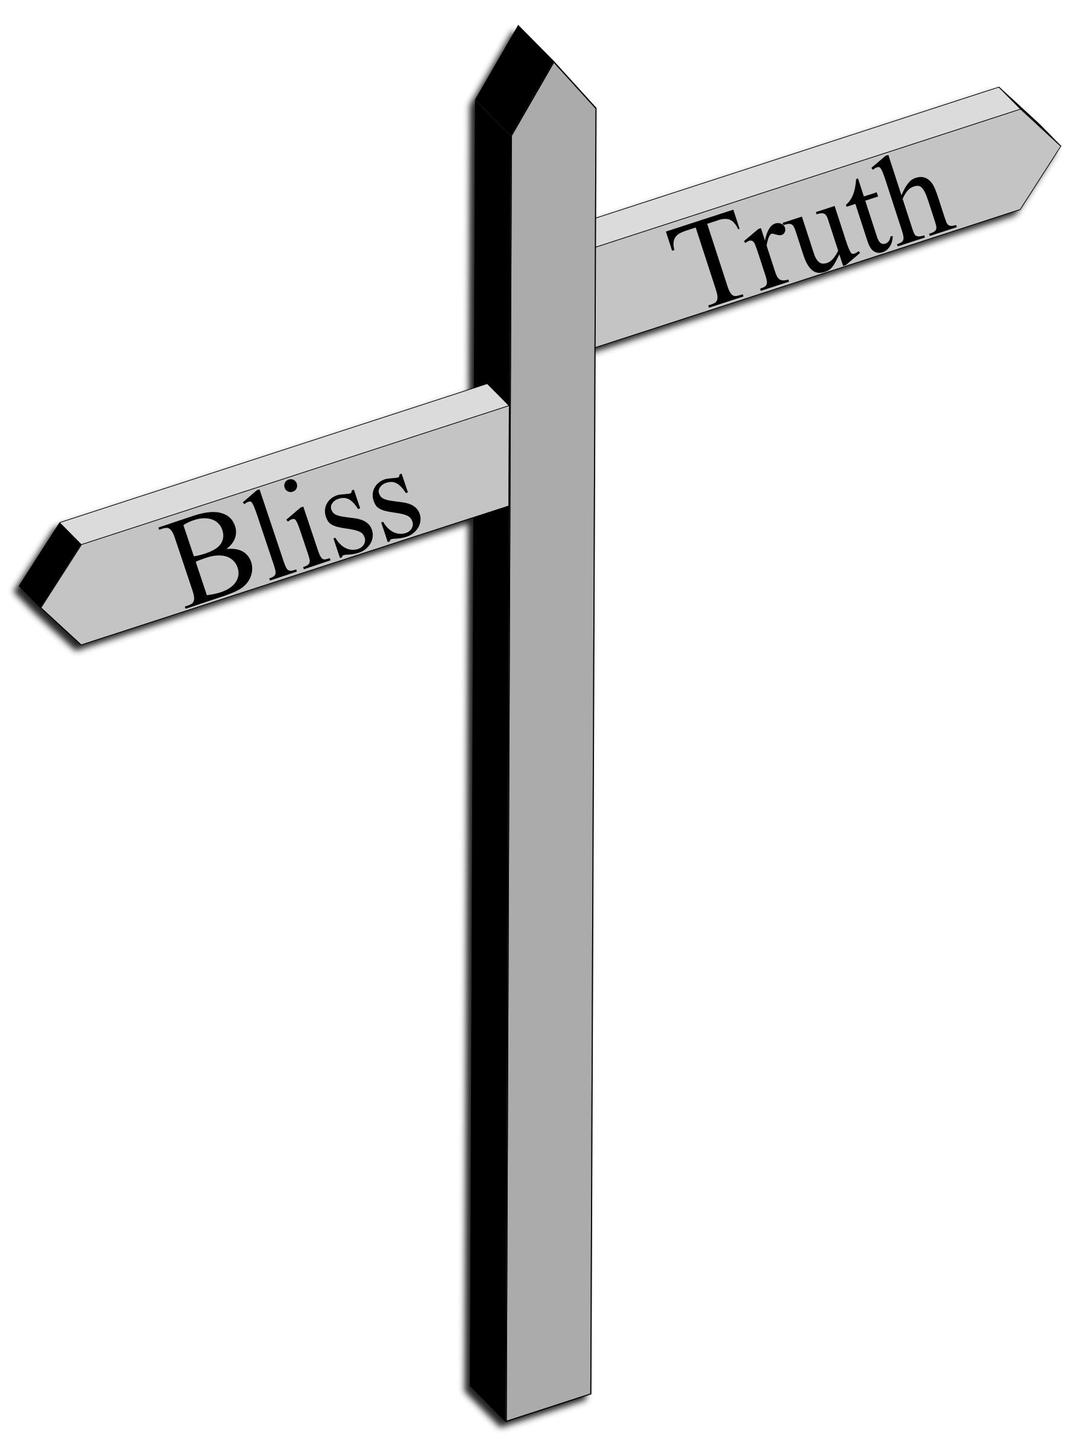 Blissful Truth png transparent